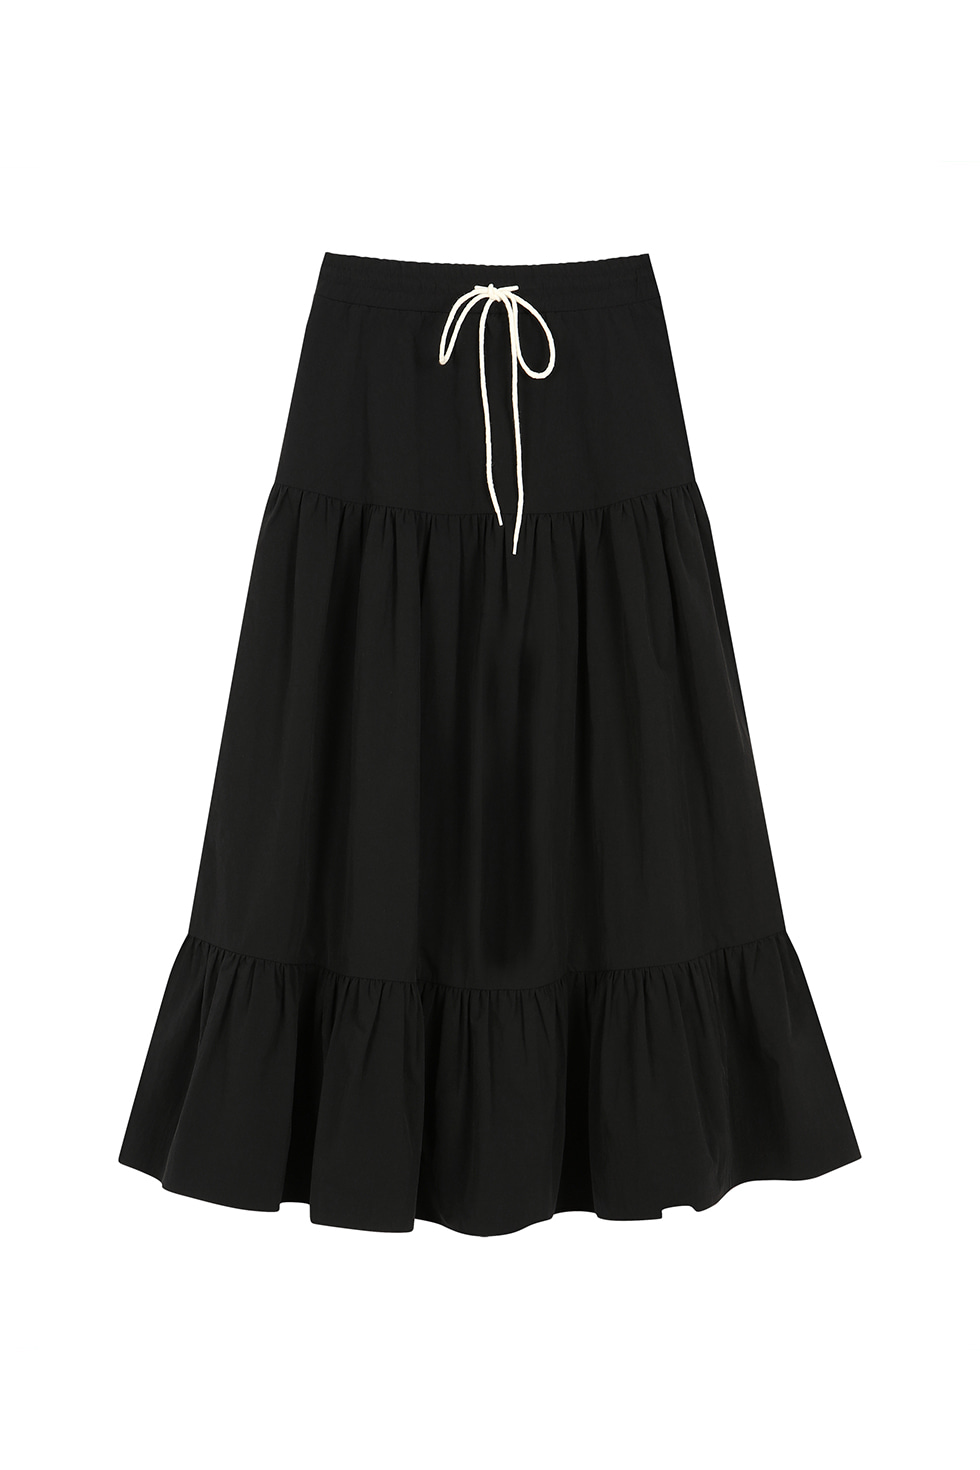 CAN CAN LONG SKIRT - BLACK